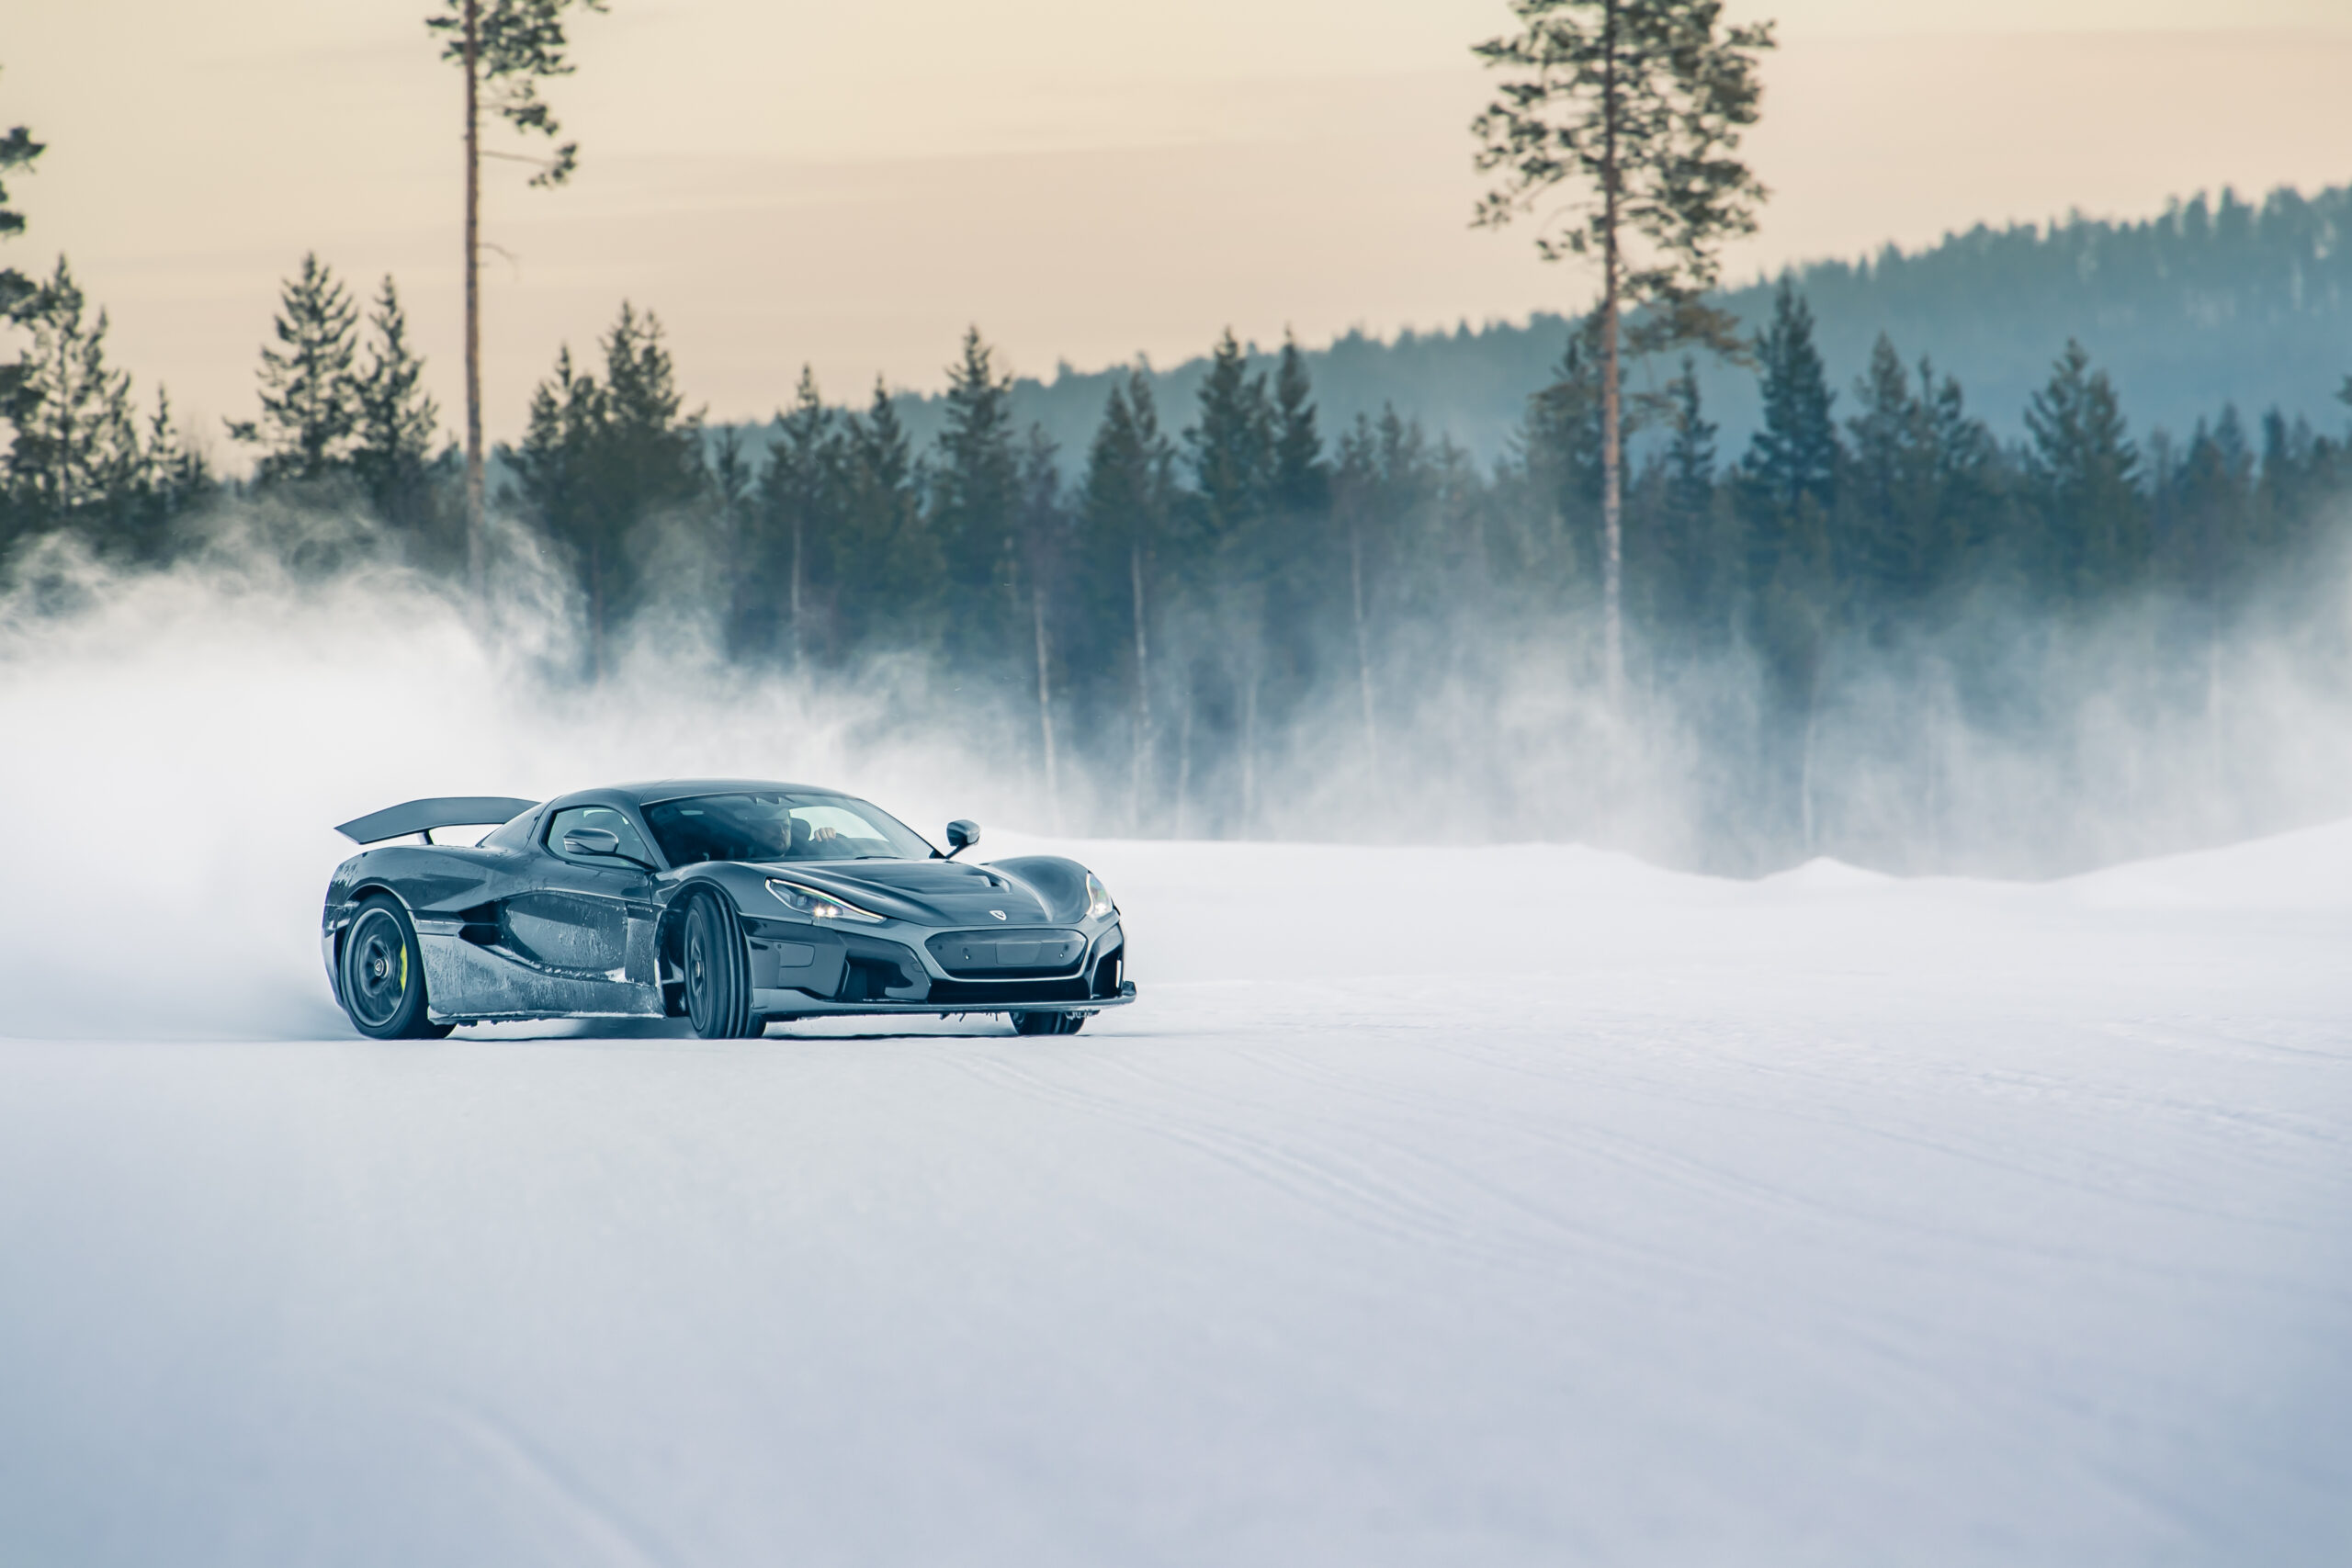 Pirelli Converts Winter Proving Grounds for Summer Testing | THE SHOP